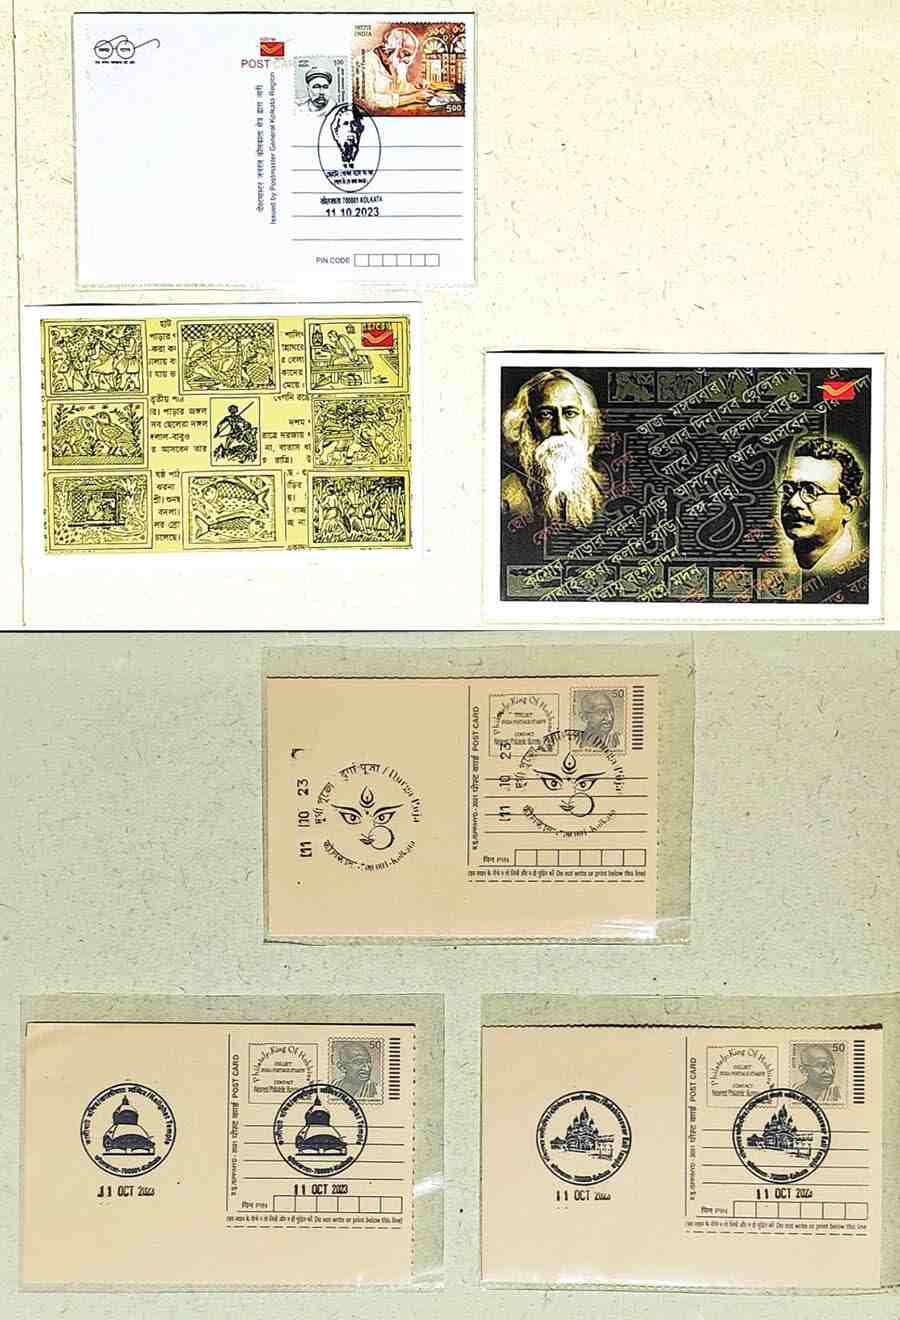 The Department of Posts is celebrating National Postal Week between October 9 and October 13. It observed October 11 as Philately Day, for which a programme was organised at the GPO where Sanjiv Ranjan, postmaster general,  Kolkata region launched the Permanent Pictorial cancellation programme themed on Durga Puja and important landmarks of Kolkata. A Pictorial Cancellation is a postmark, which shows a replica/ photo/ design or a picture highlighting a tourist, religious, historical or an important place or thing. Thus Pictorial Cancellations give wide publicity mainly to places of tourist interest and they are provided at the post offices which are located near such places of tourist attraction. As per available information, Pictorial Cancellations of permanent nature were first provided some time in 1951. Picture postcards were also launched on Wednesday 